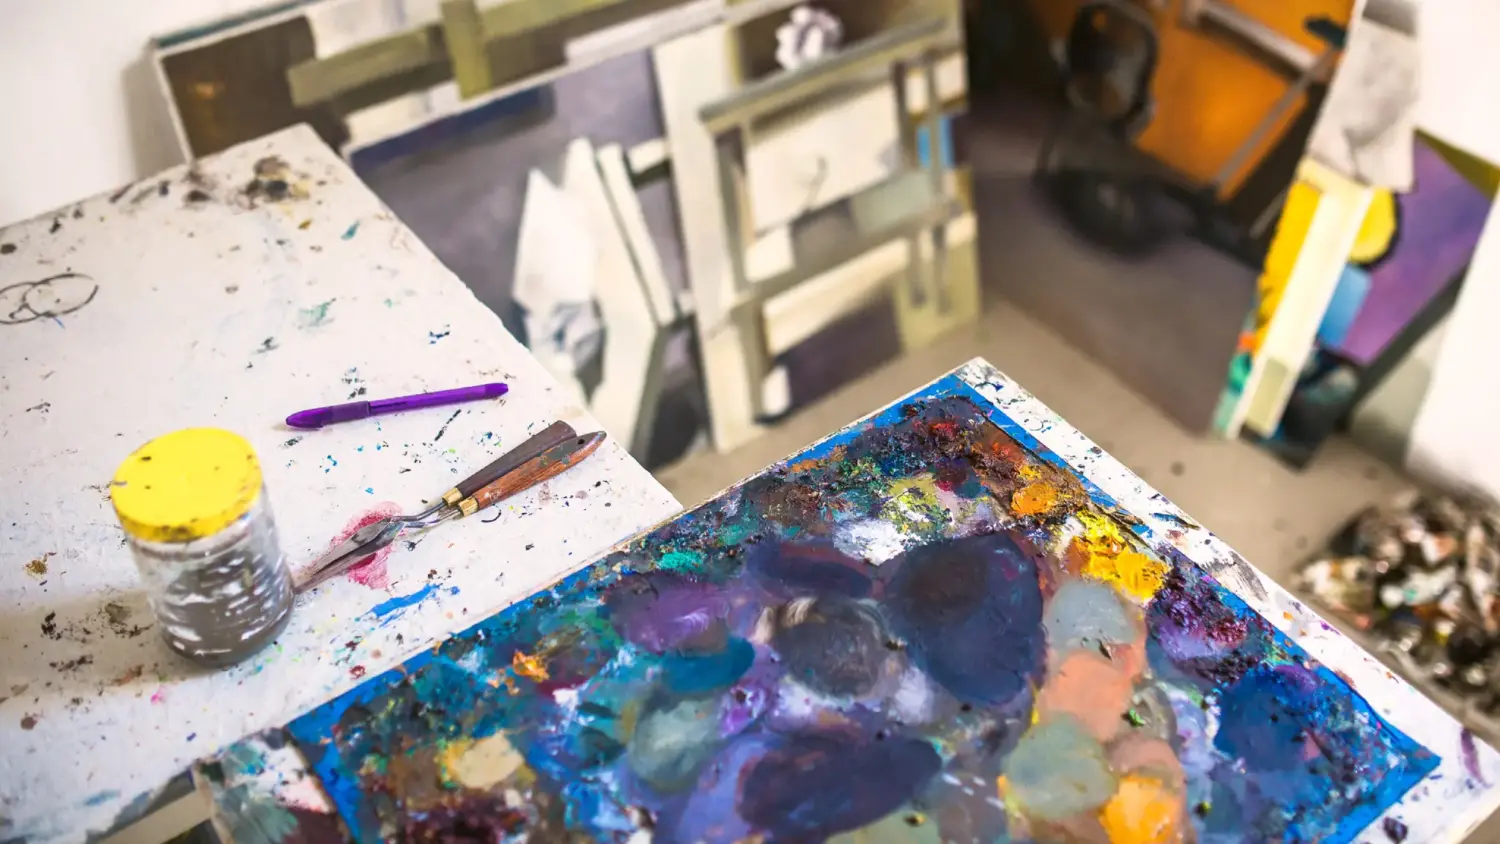 A canvas with blue and yellow paints and pallet knife rest on a table in an art studio